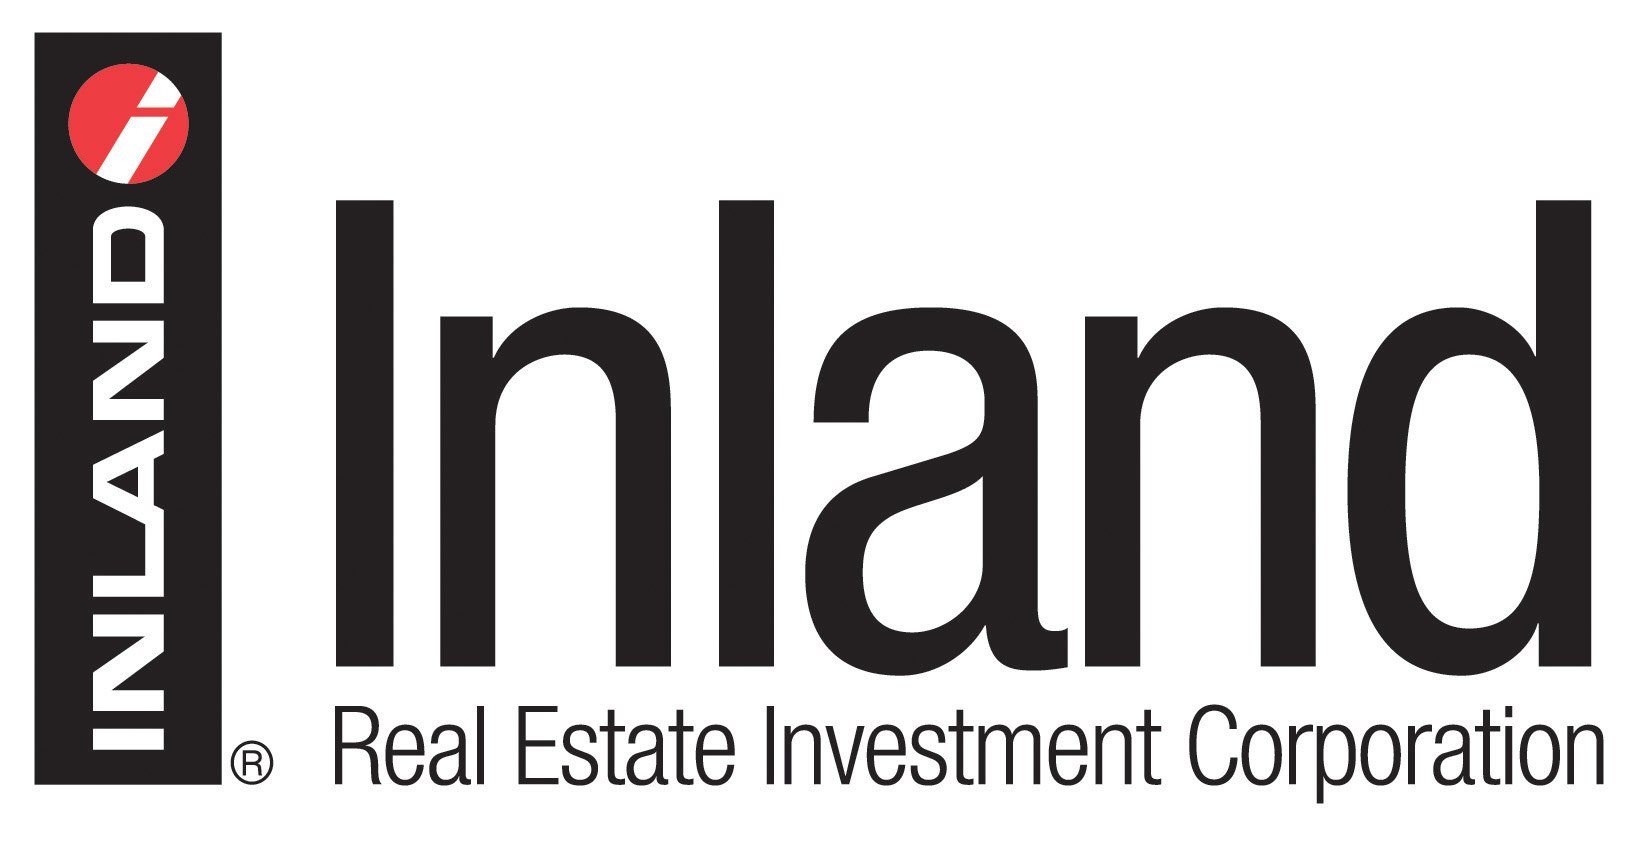 inlands property investments